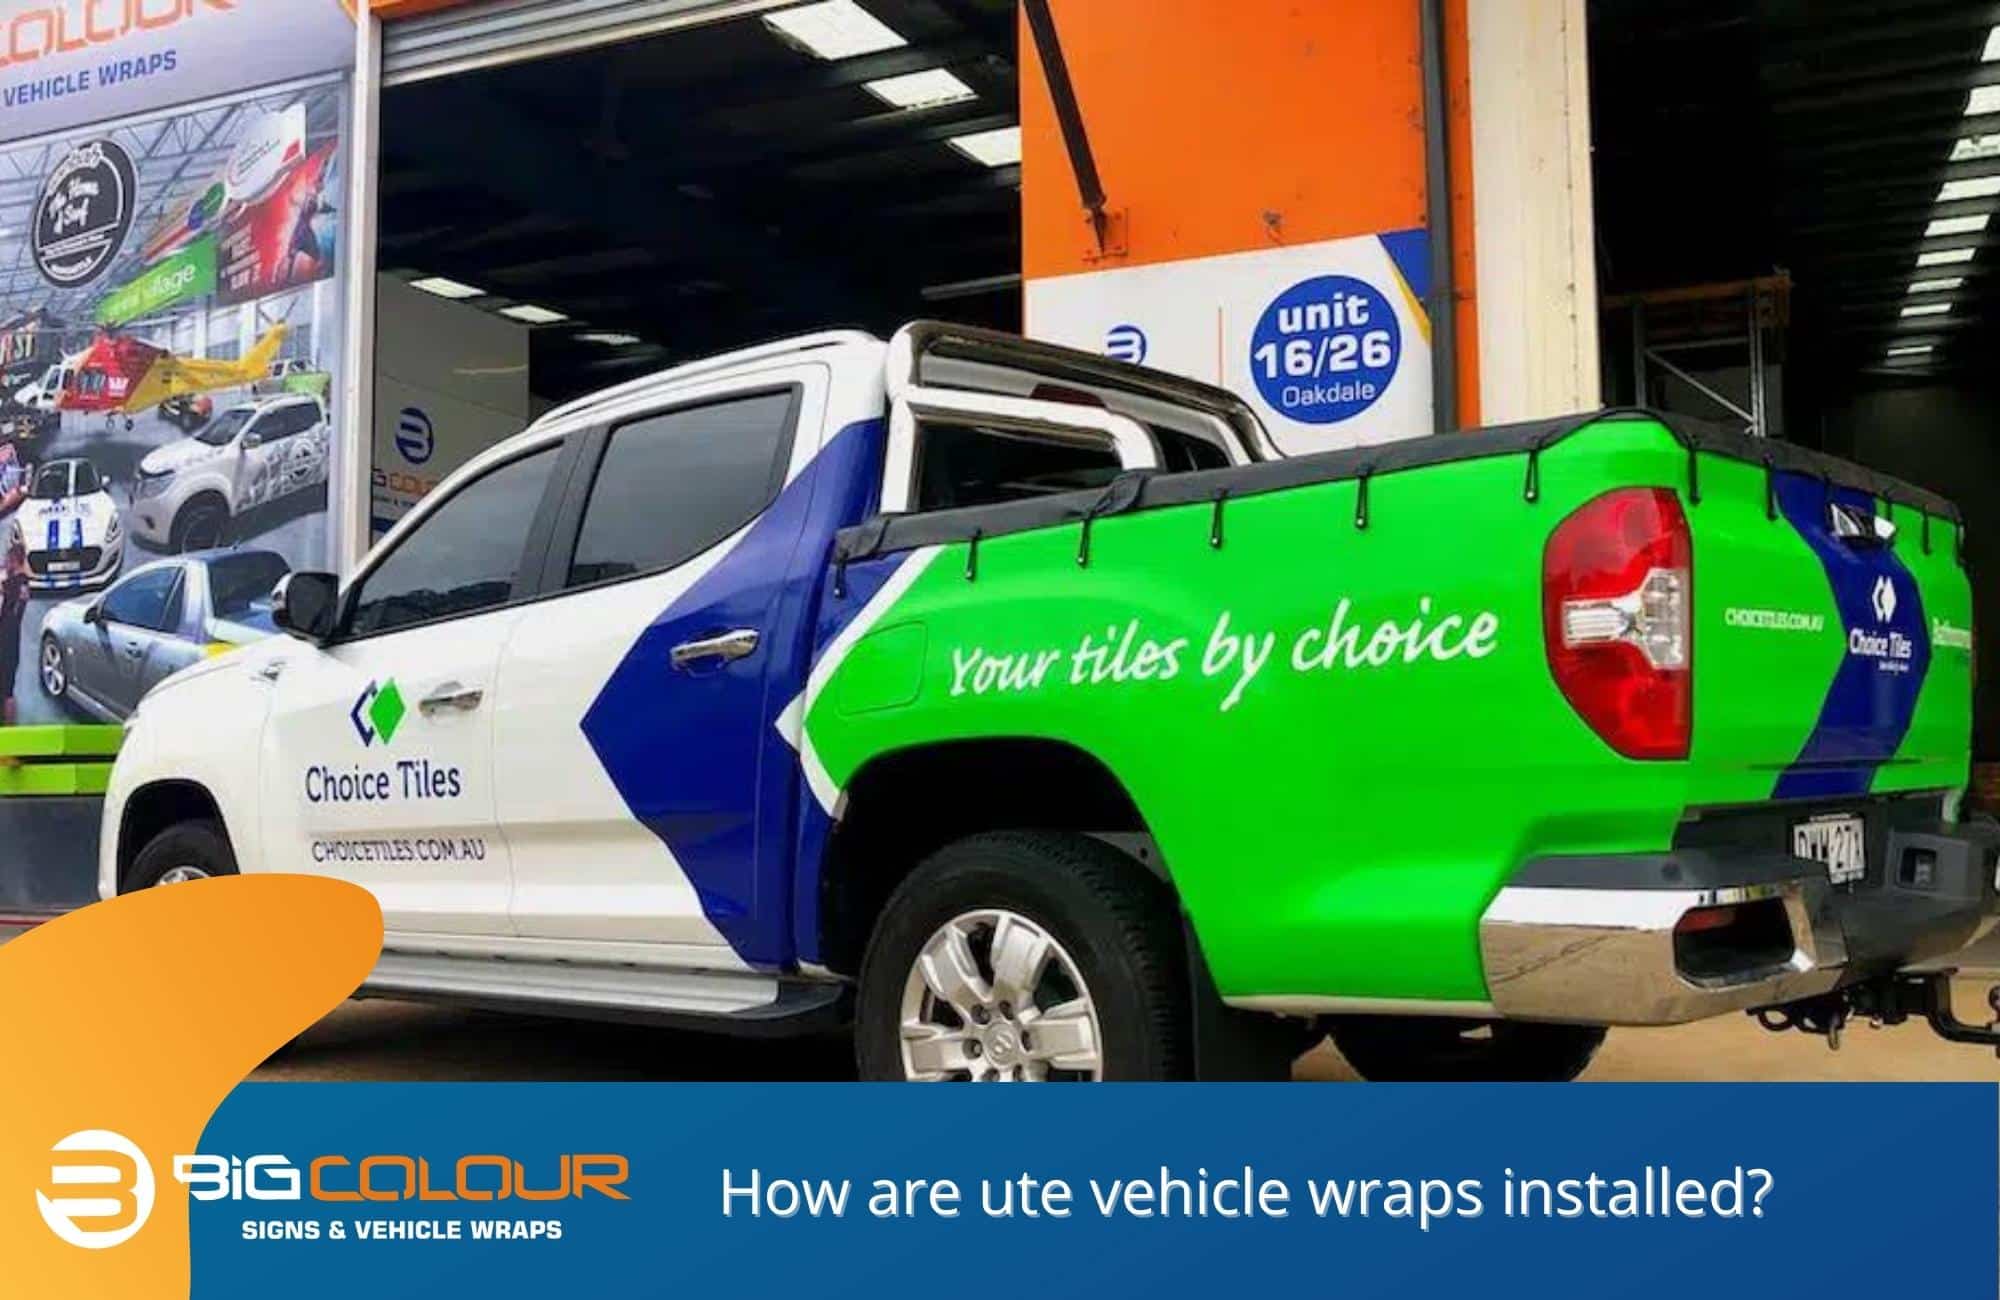 How are ute vehicle wraps installed